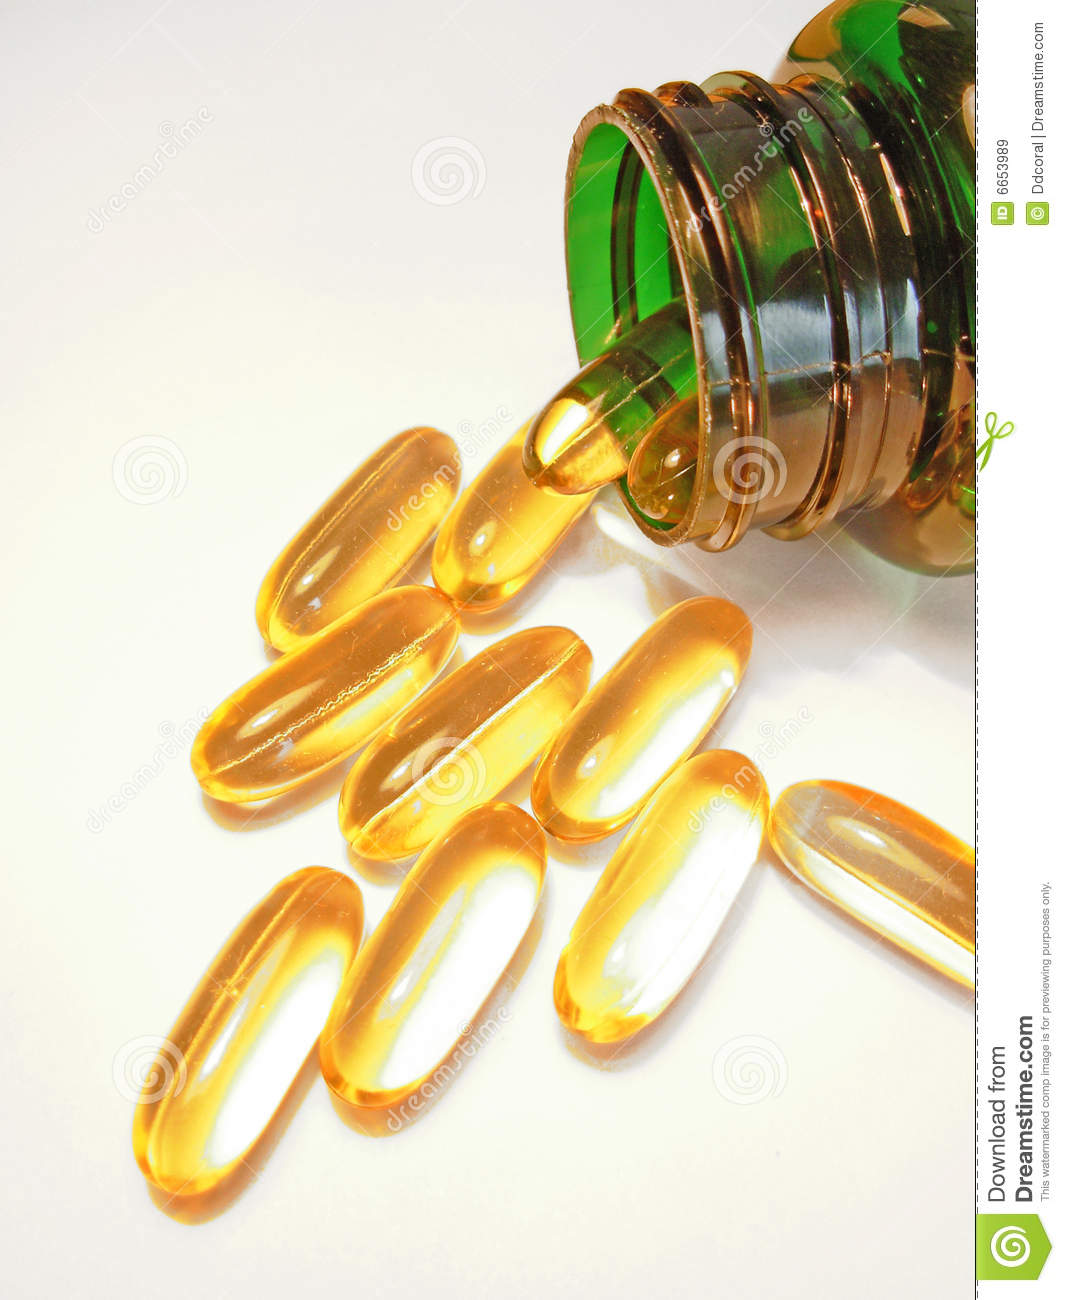 Multivitamin Capsule Royalty Free Stock Images   Image  6653989